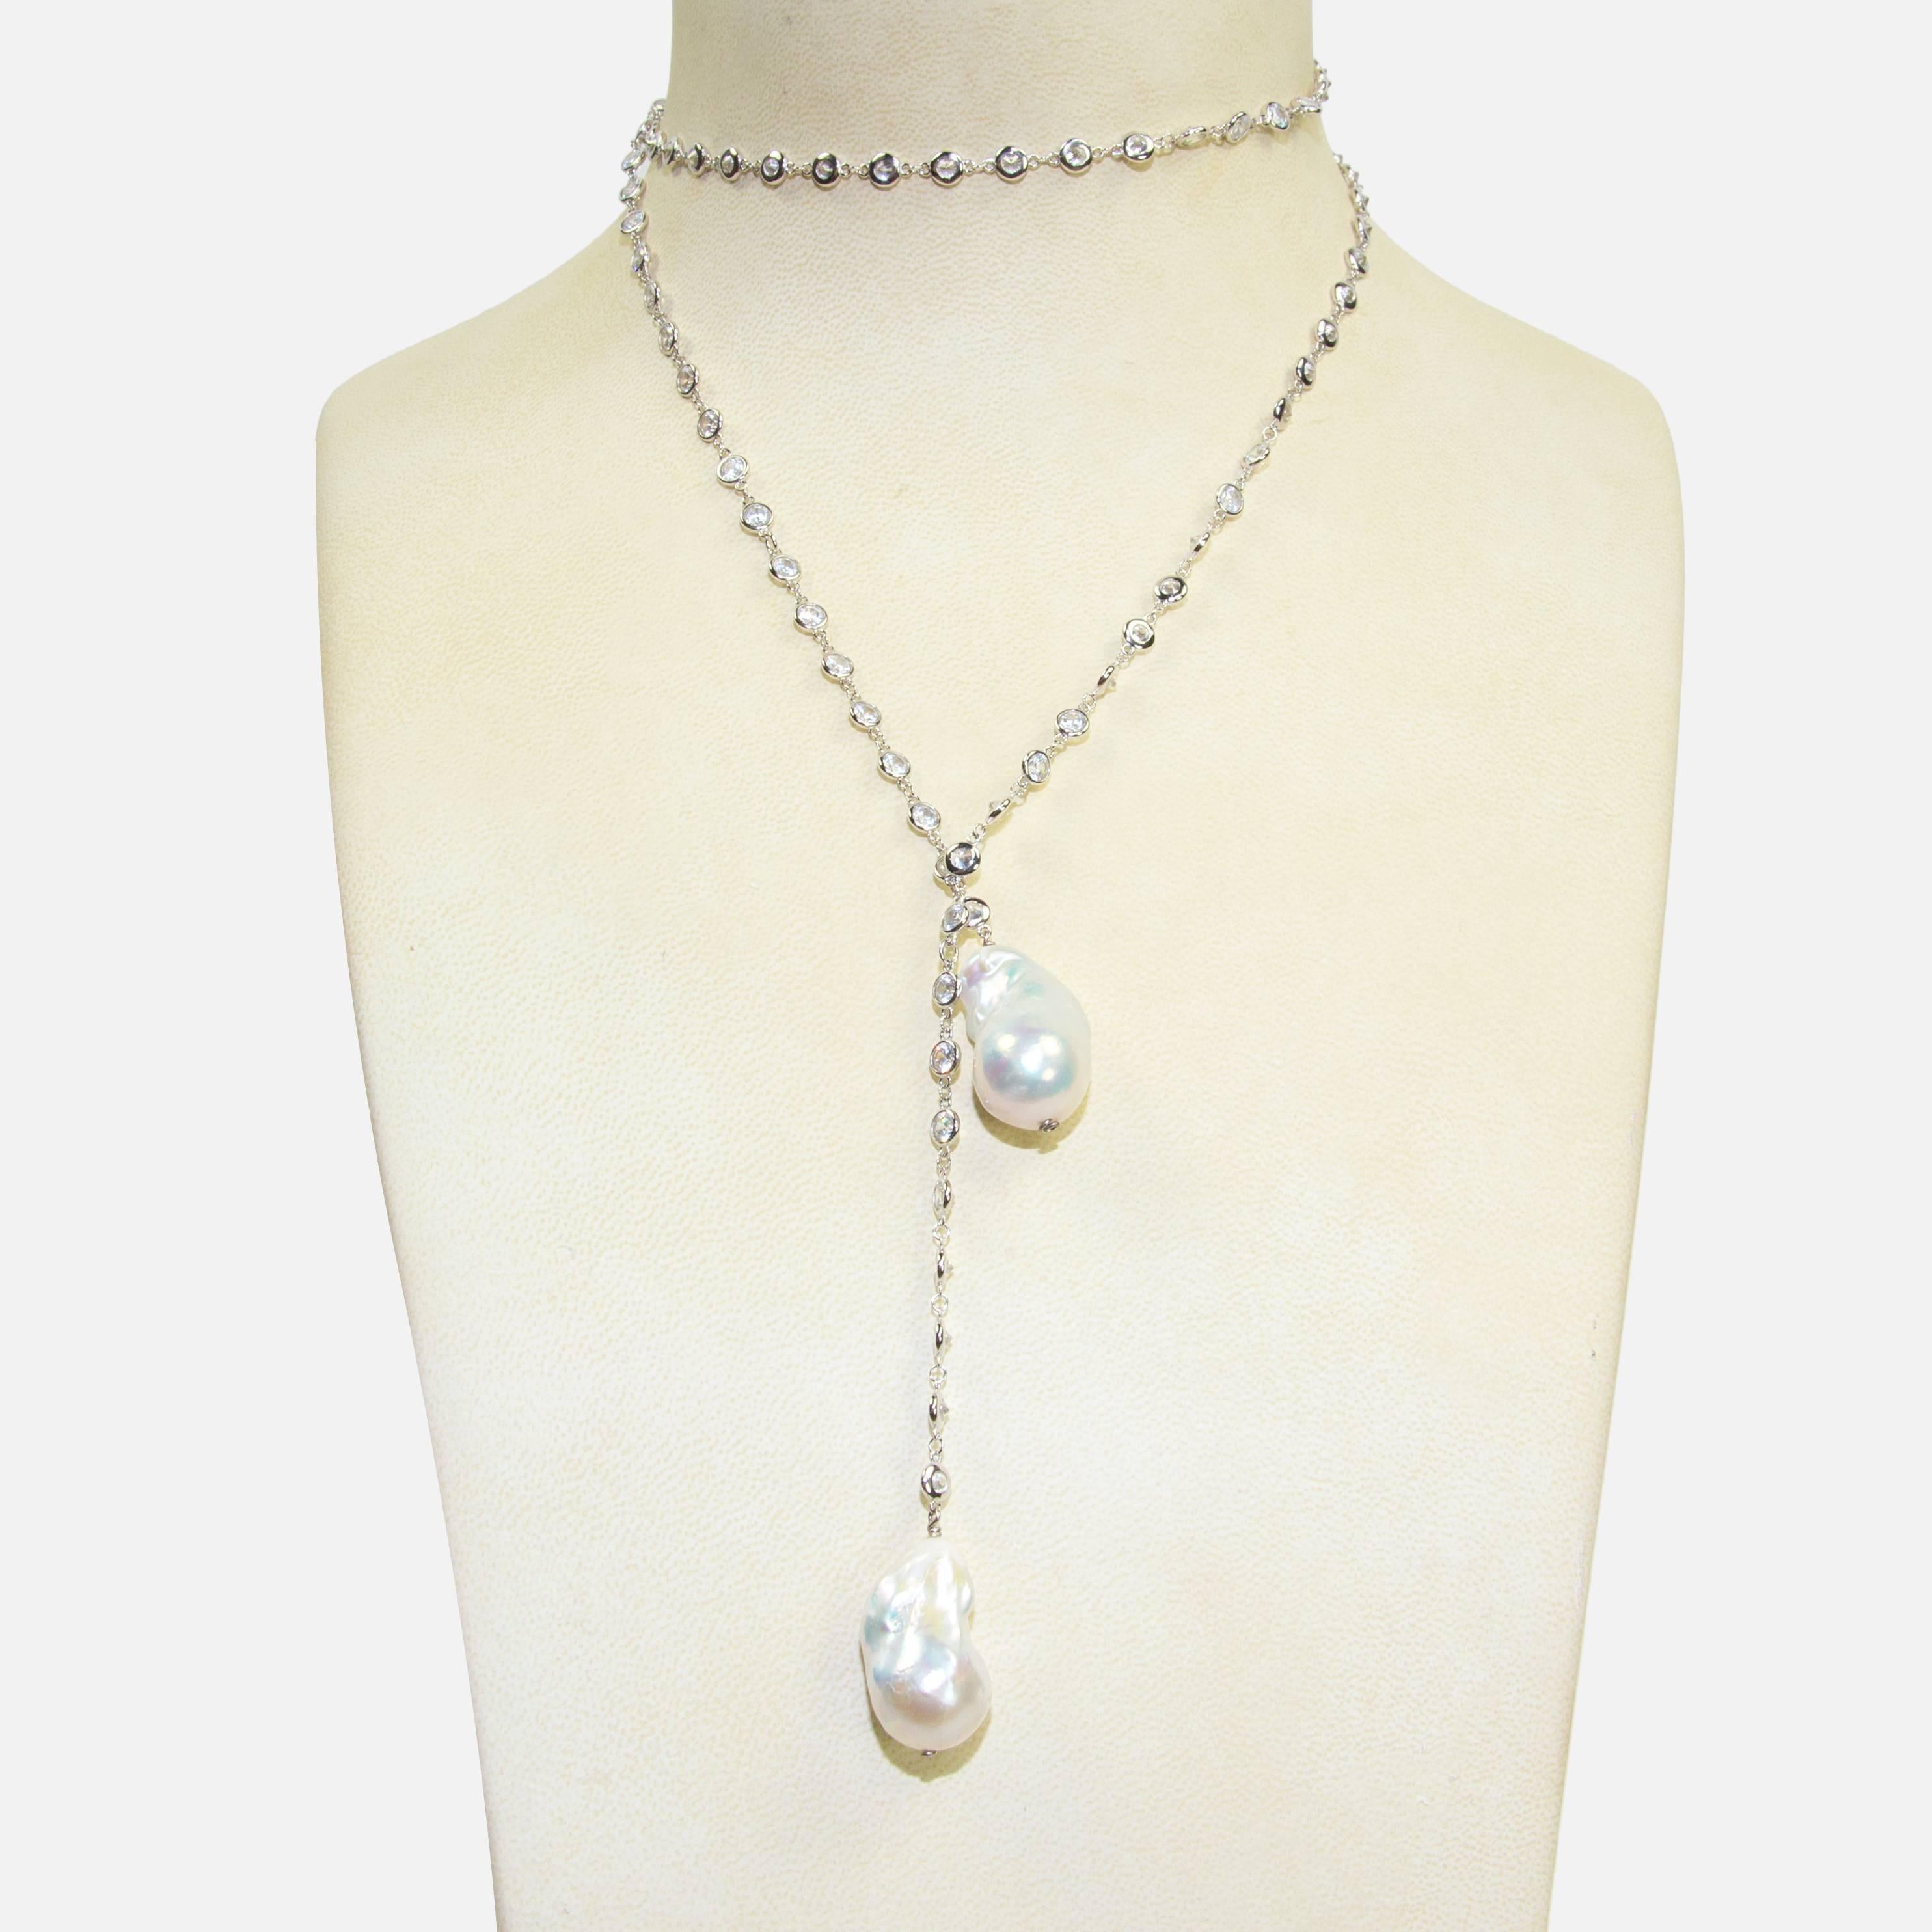 Fabulous Statement Necklace with Glittering Cubic Zirconium CZ chain, suspending two large Cultured Freshwater Baroque Pearls, Sterling Silver CZ chain; approx. 32 inches; long plus each pearl measuring approx. 1 inch. Classic and Timeless, taking